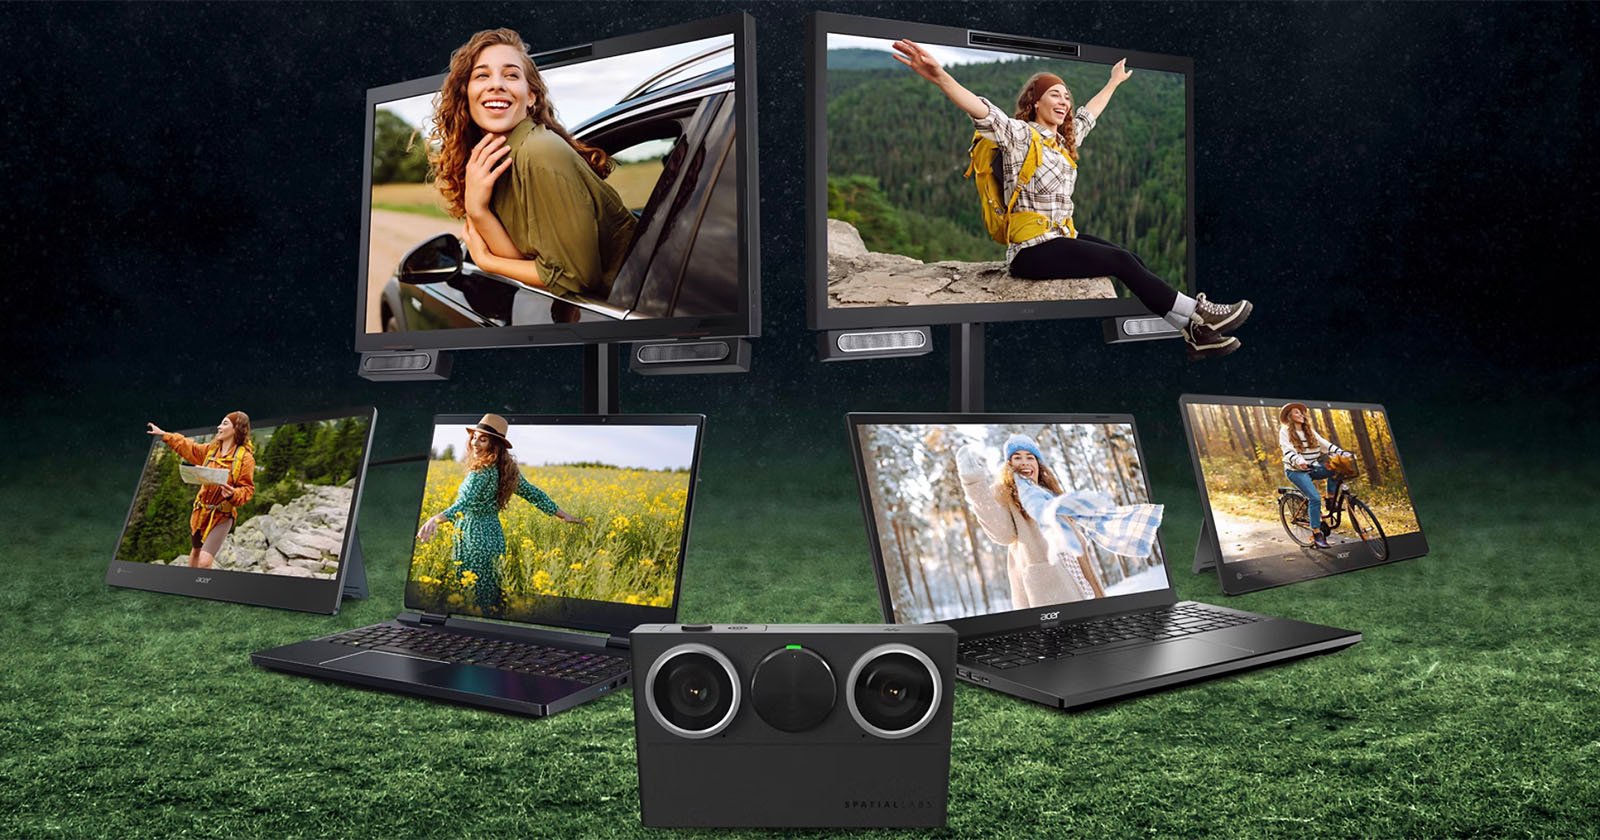 A collection of six laptops and one gadget featuring different images of women in outdoor settings, including fields, mountains, and forests. The screens showcase various activities like posing, hiking, and cycling. The background is a dark, grassy terrain.